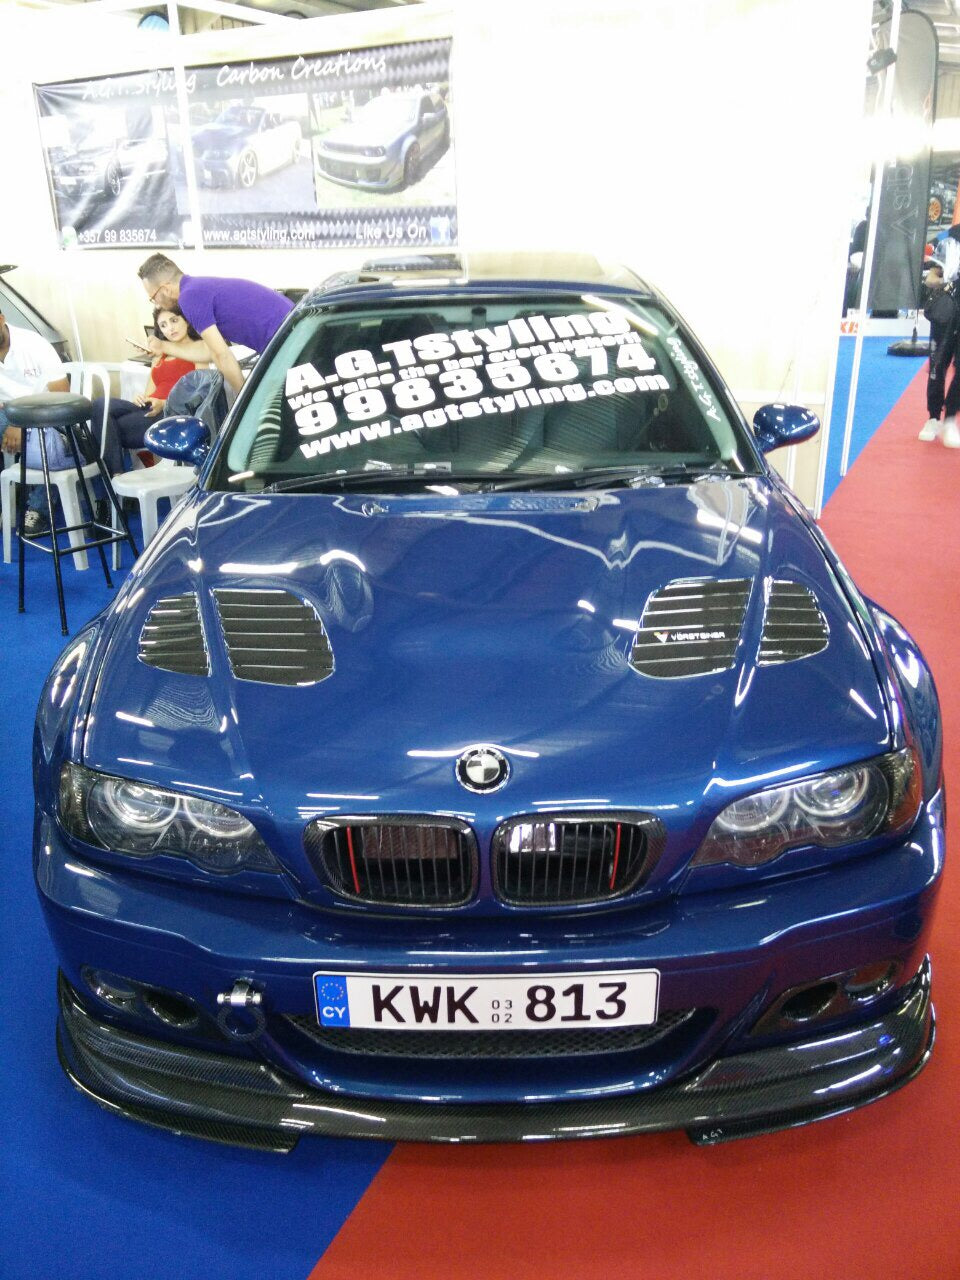 VRS Front Hood (BMW E46 M3 Cabrio & Coupe, E46 with M3 front fenders)